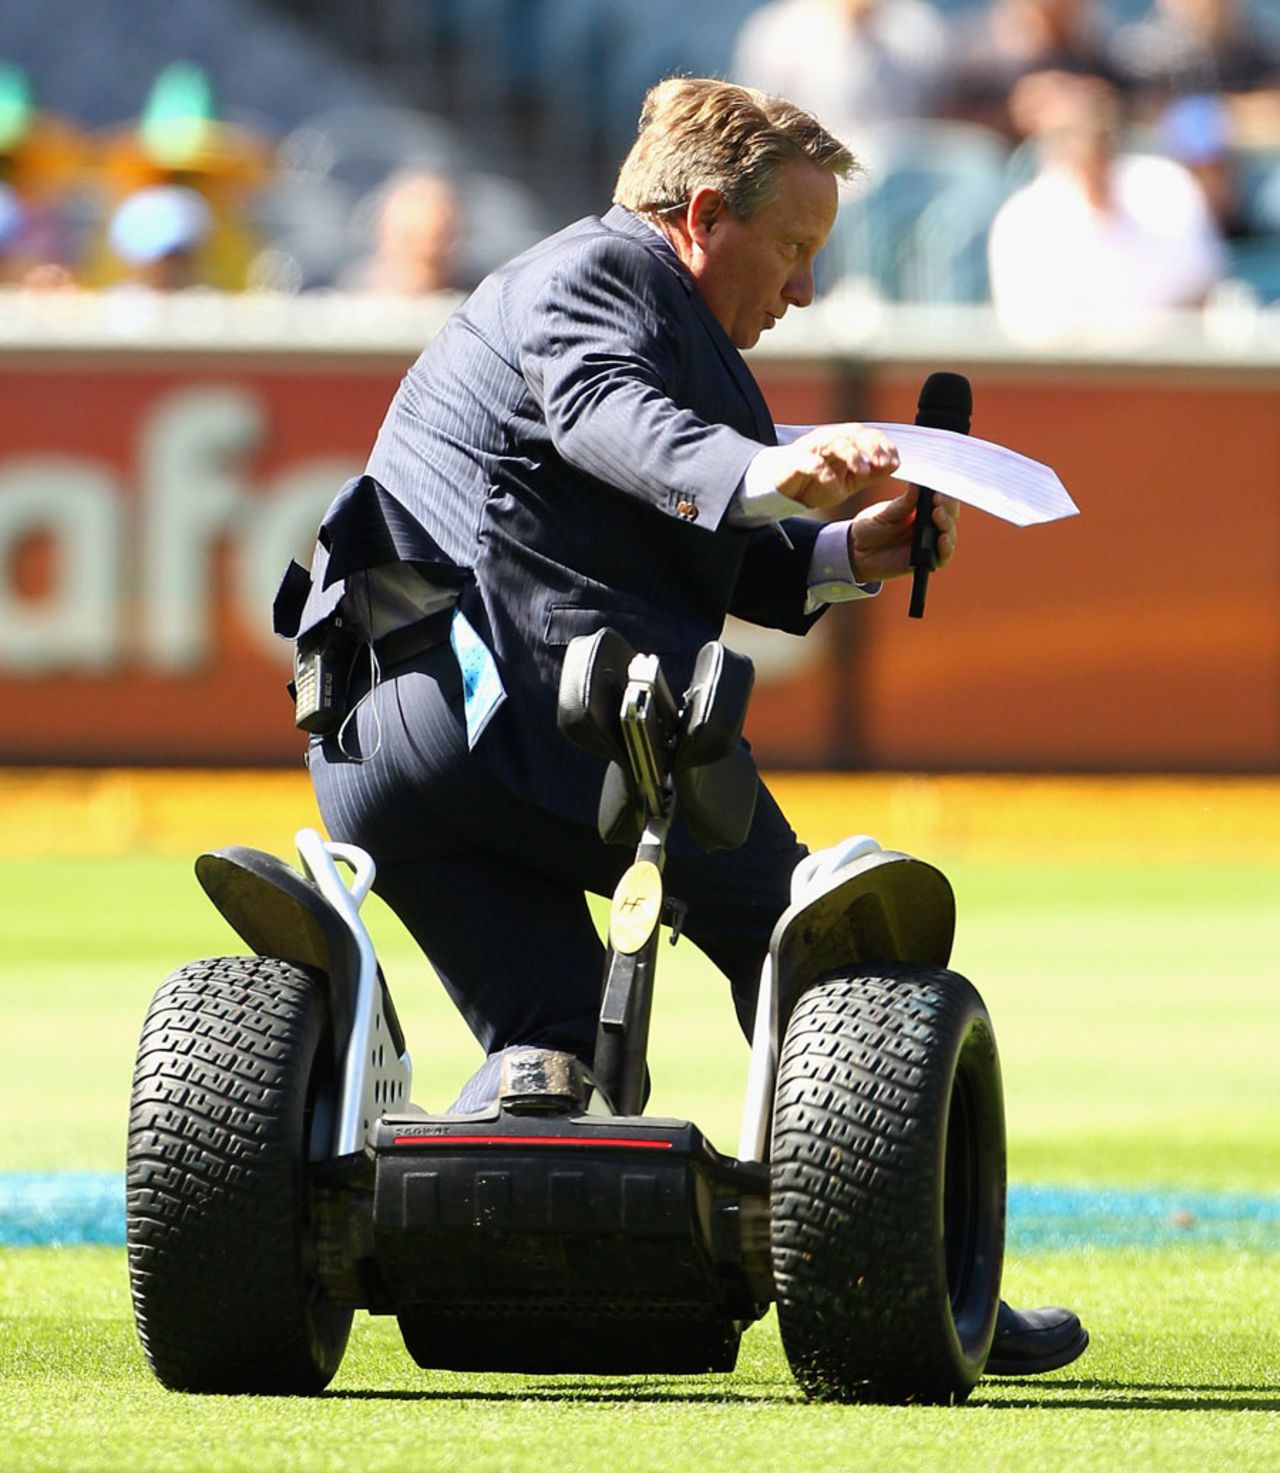 Ian Healy became the segway camera's second victim in two days, Australia v India, 1st Test, Melbourne, 3rd day, December 28, 2011